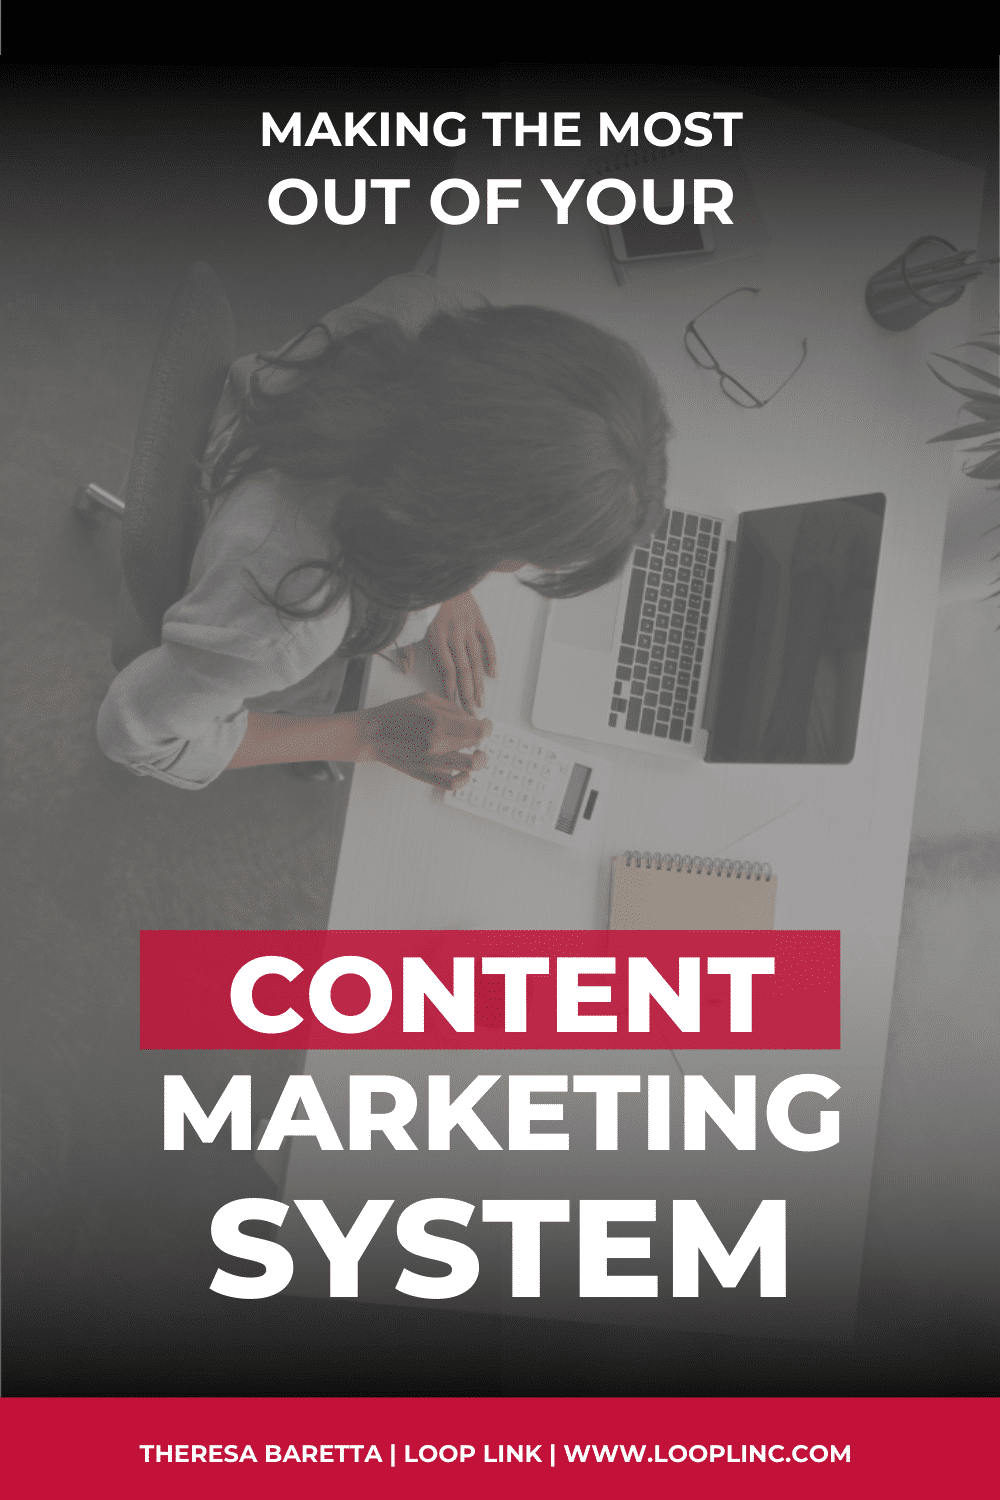 Making the most tout of your content marketing system